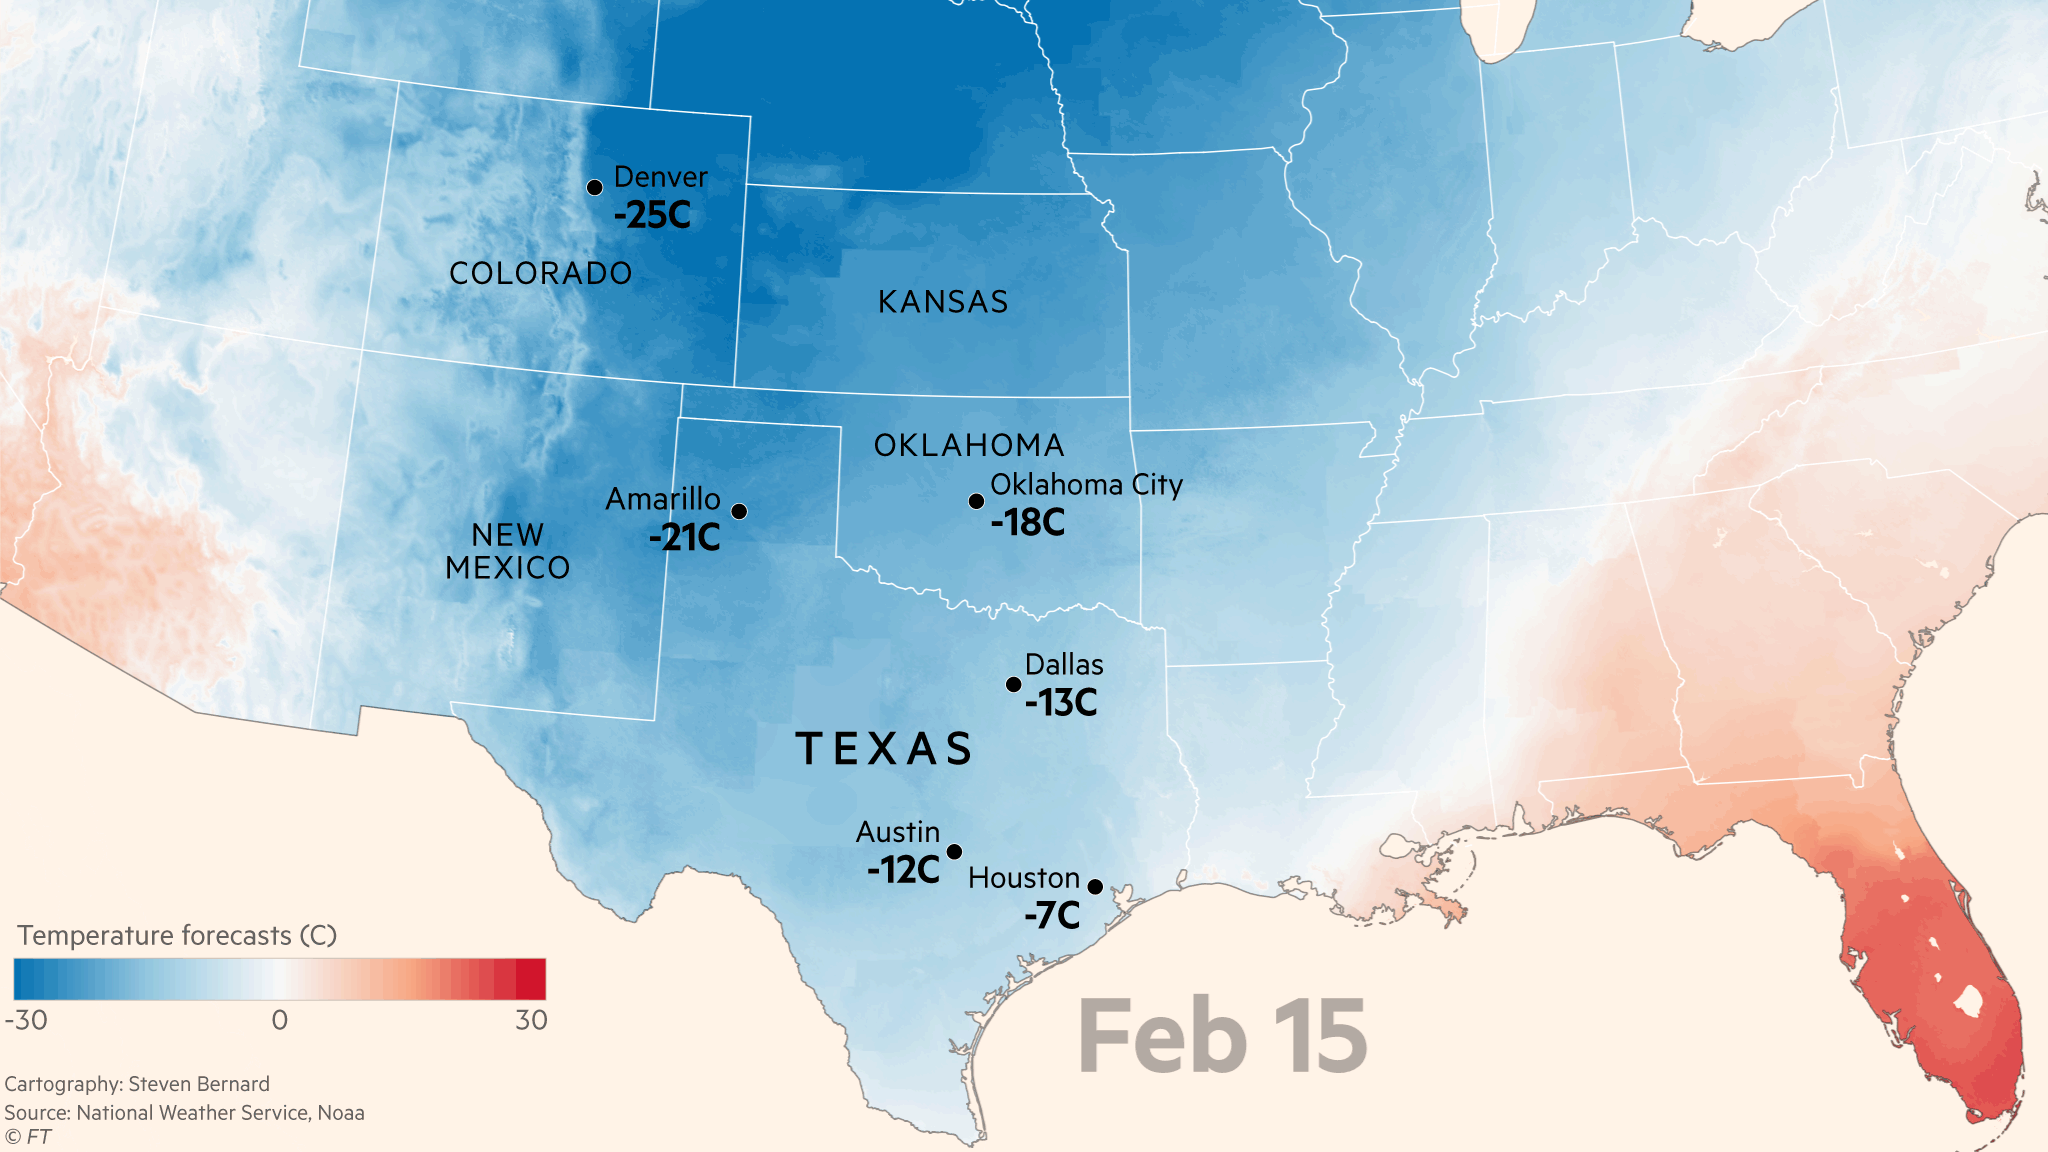 Blackouts spread beyond Texas as frigid weather knocks out power plants |  Financial Times